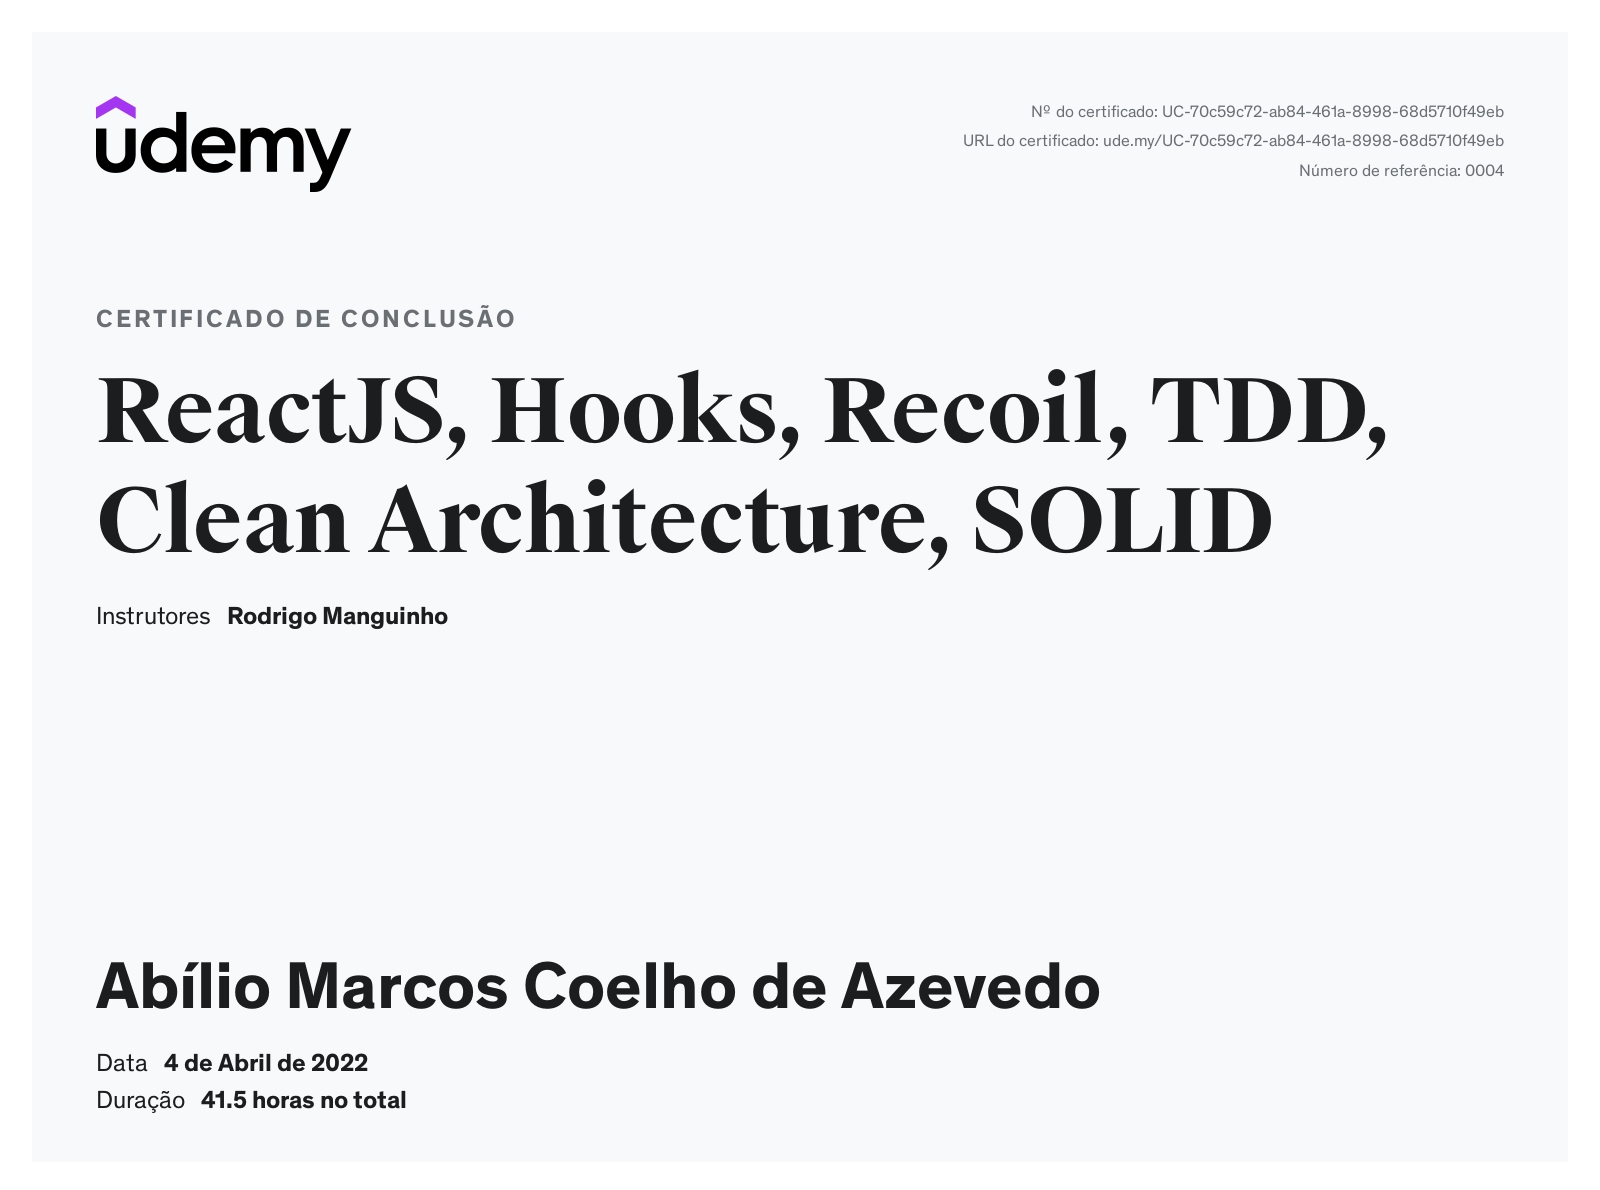 Cover Image for Curso ReactJS, Hooks, Recoil, TDD, Clean Architecture, SOLID